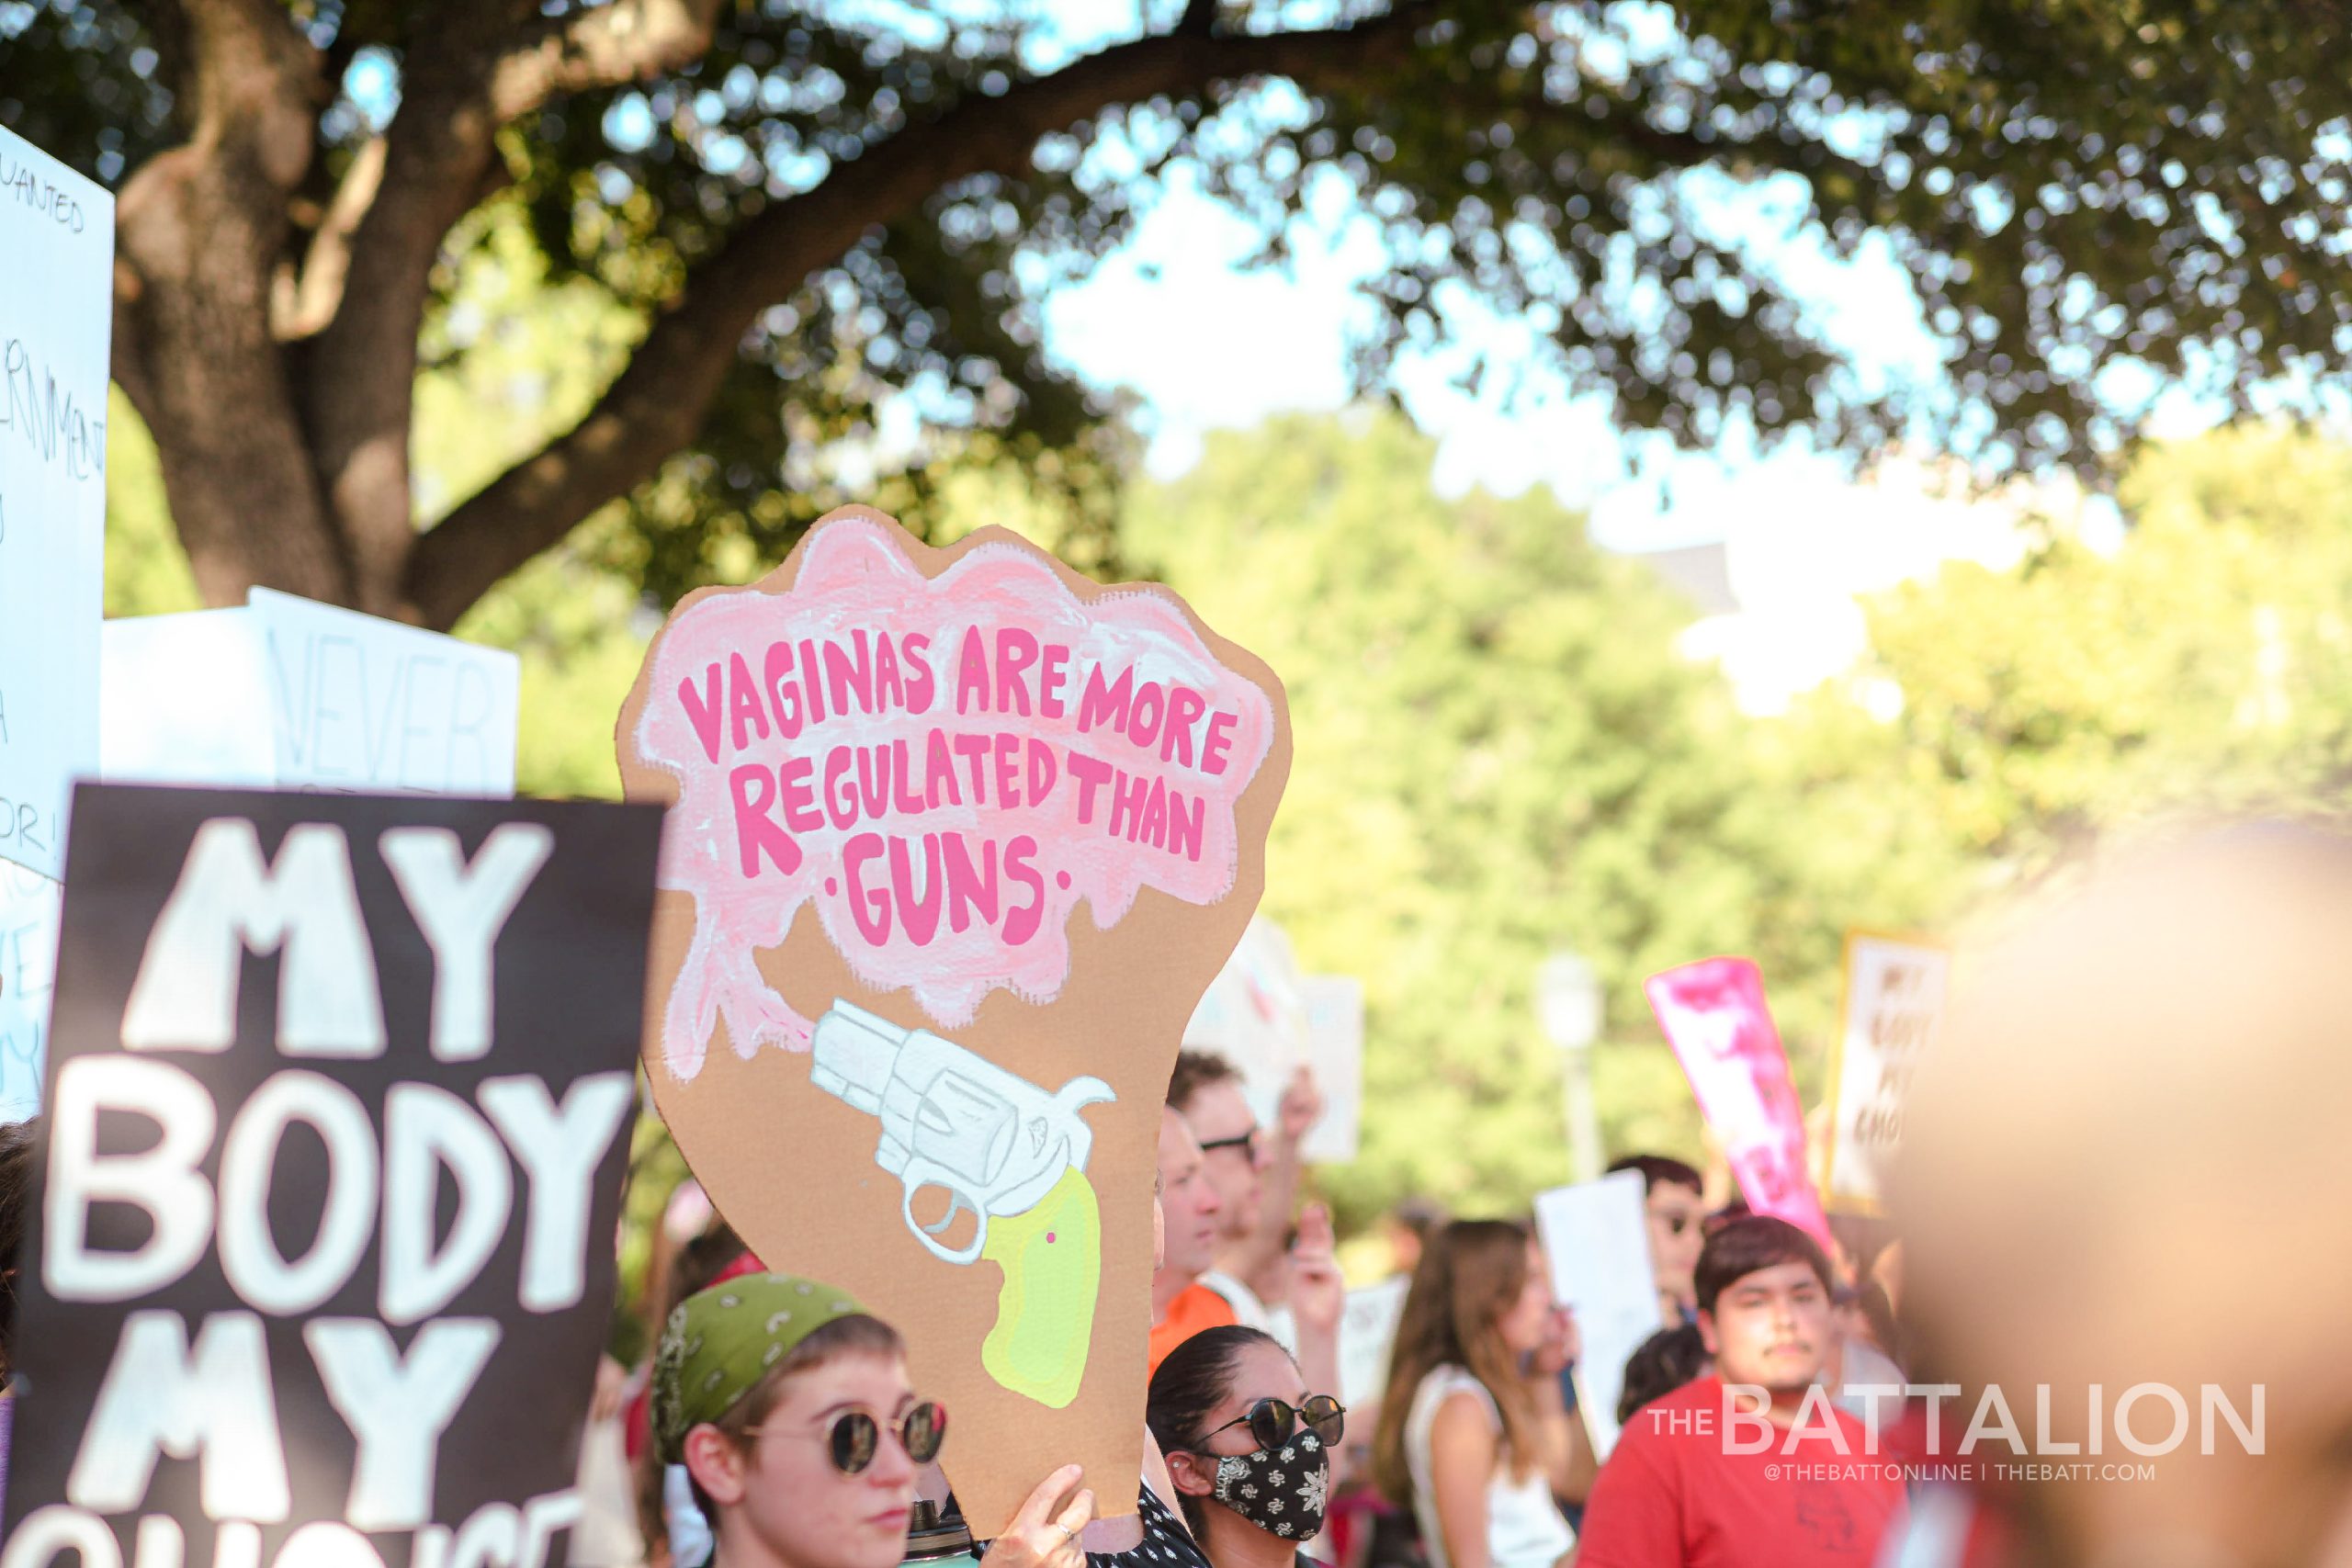 GALLERY%3A+March+to+the+Texas+Capitol+Abortion+Rally